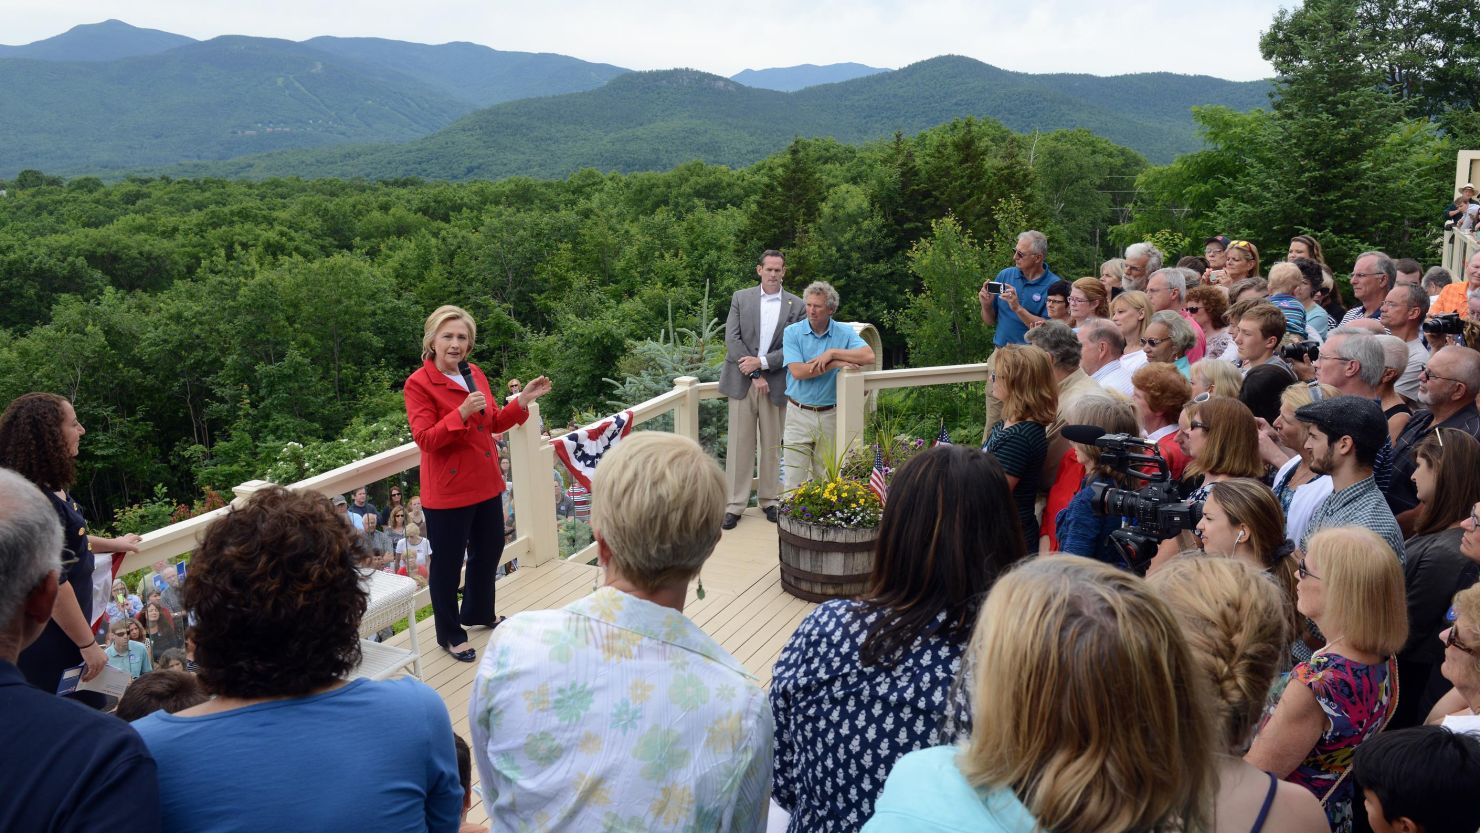 Candidate Hillary Clinton speaks at an organizing event at a private home in Glen, New Hampshire. 